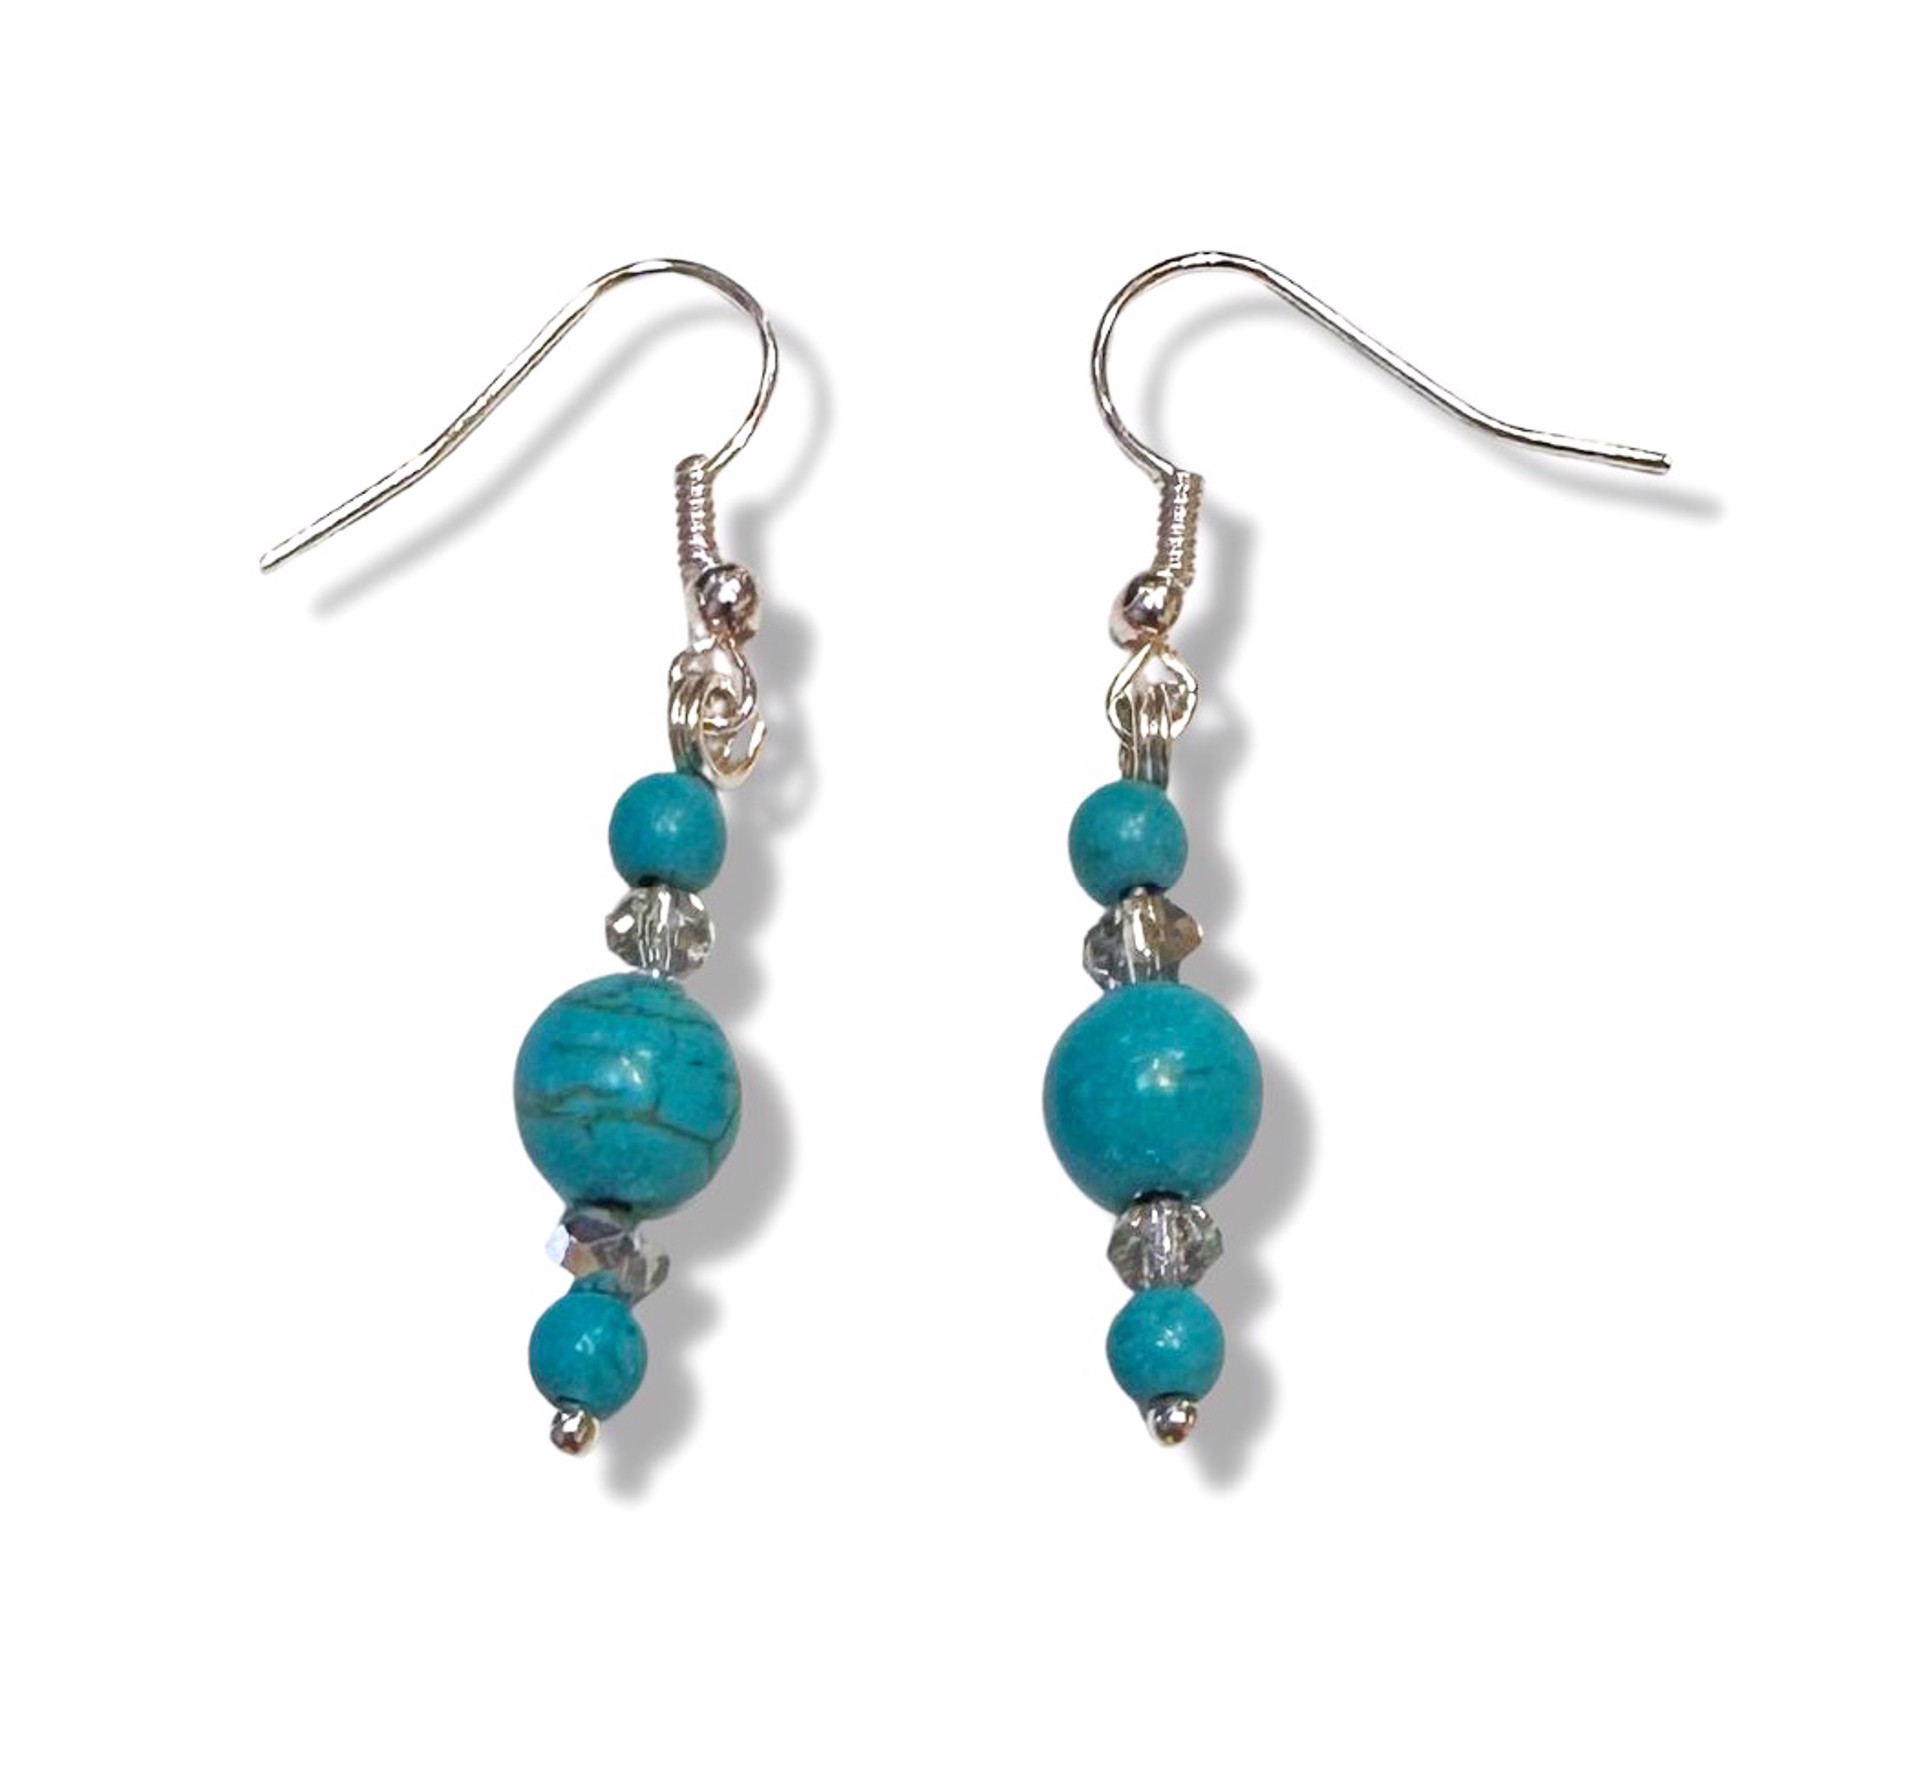 Earrings - Handmade with Turquoise Beads by Kai Cook